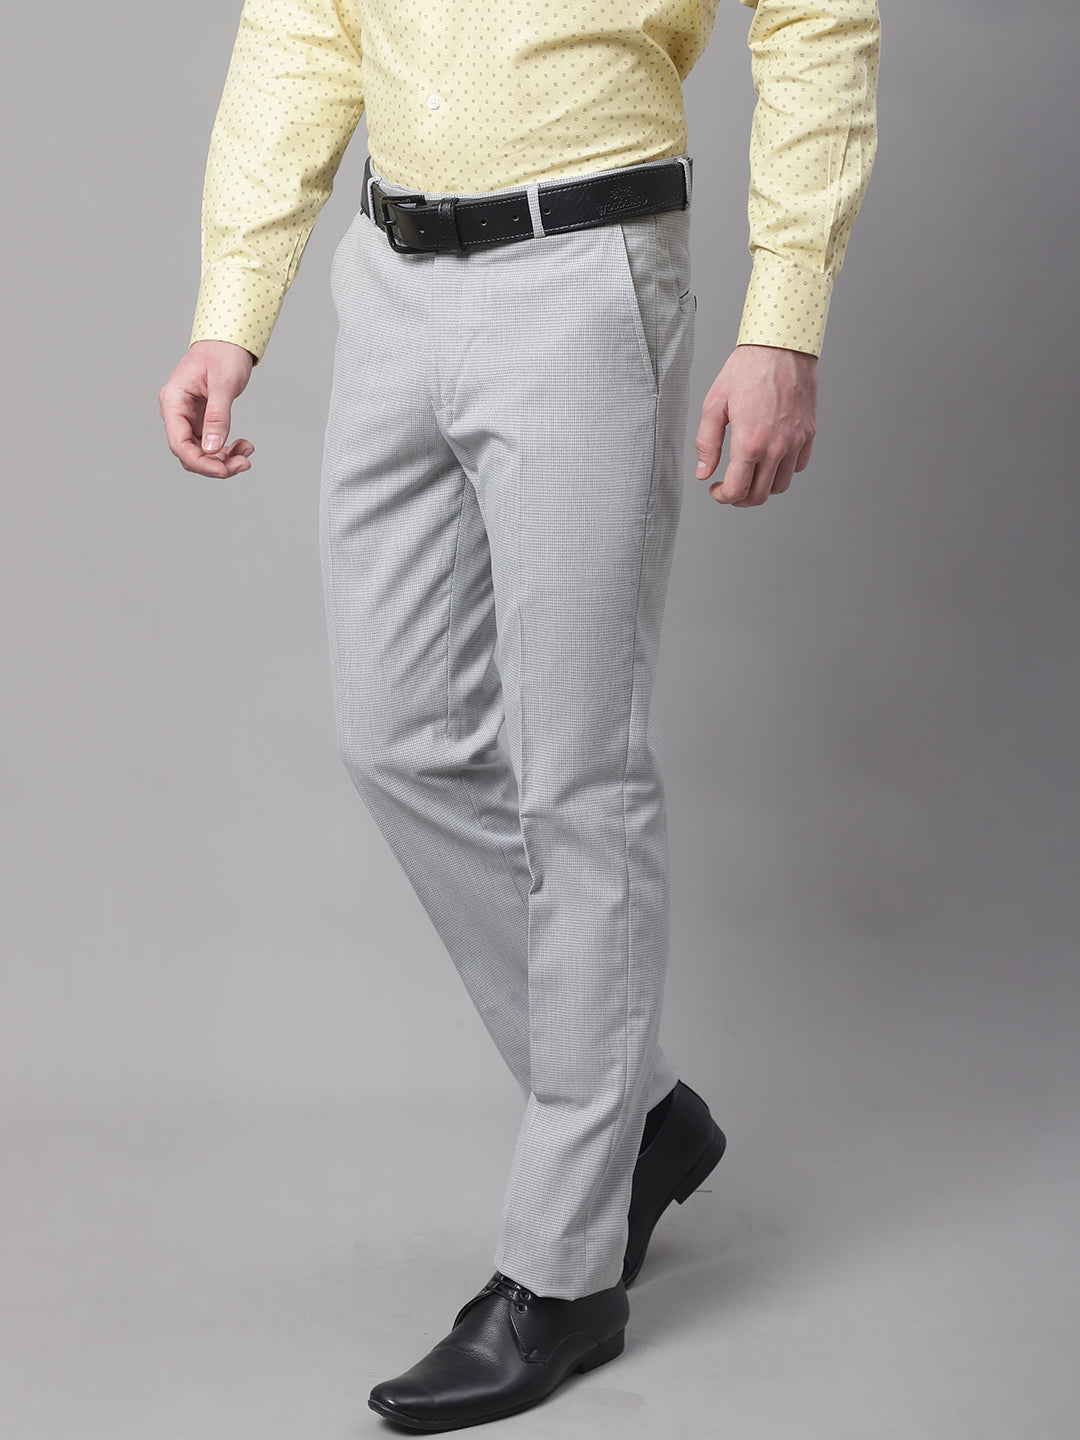 Combo trouser for men black and grey color | Black grey formal trouser for  men | Black pant for men